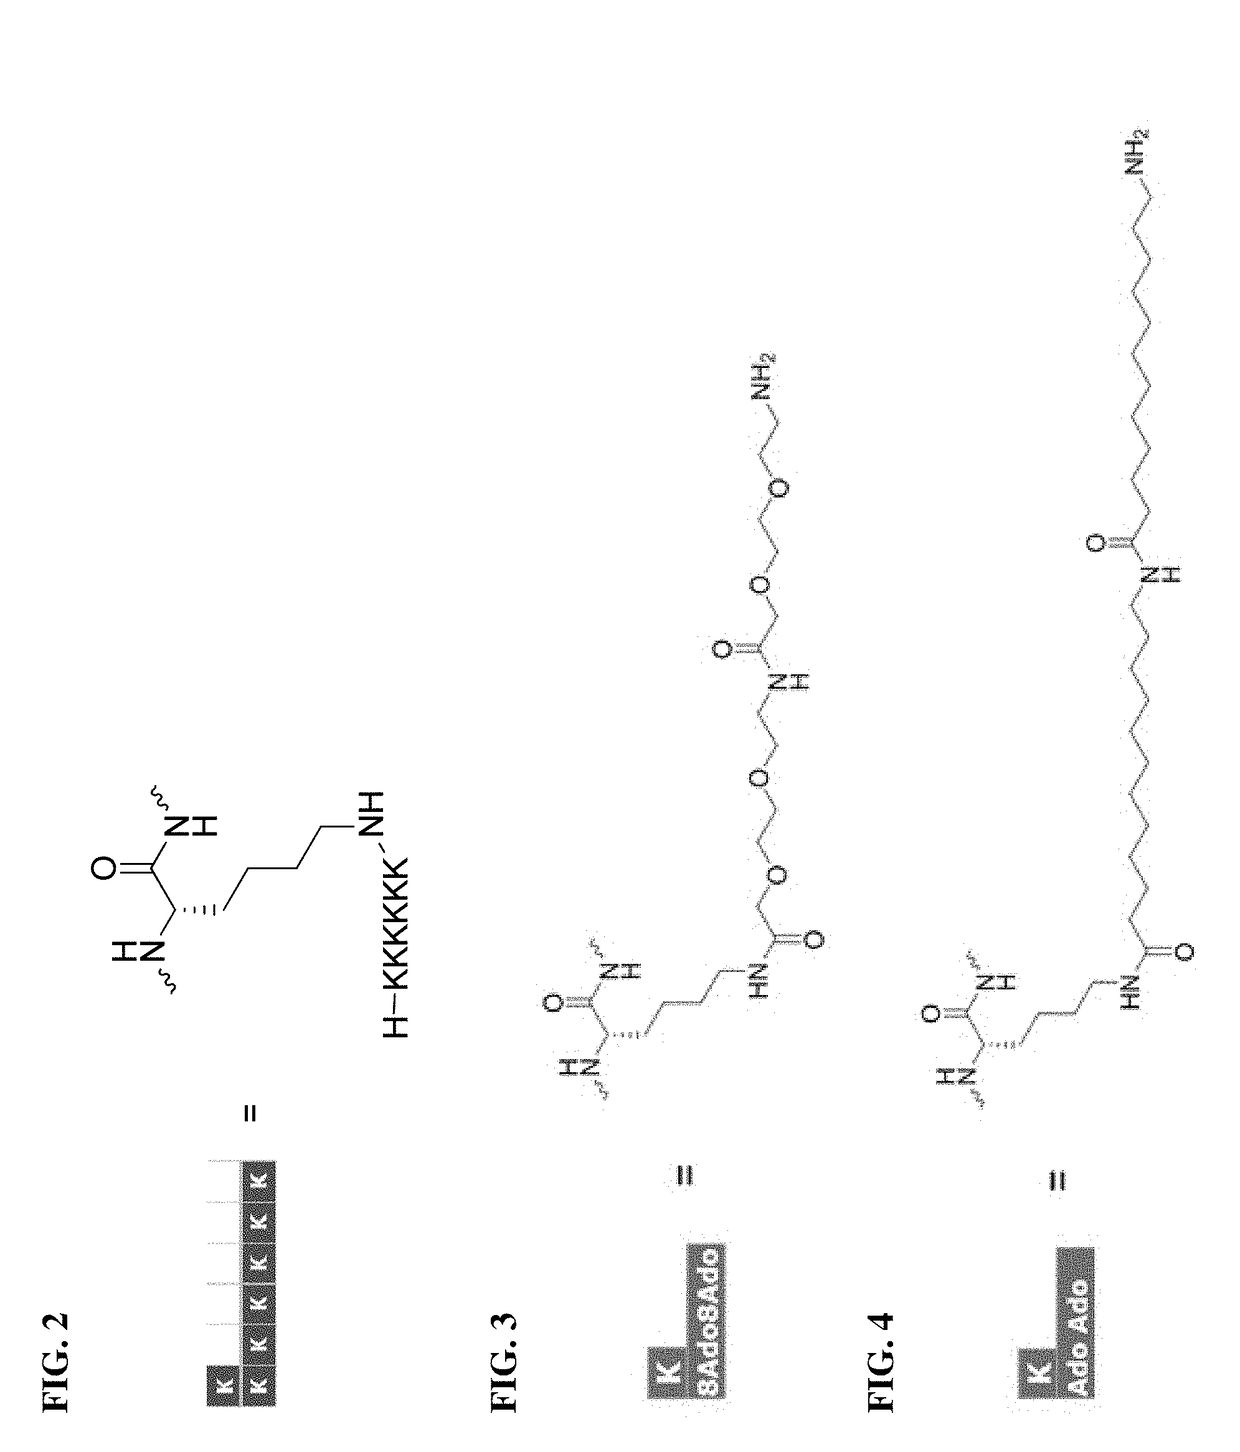 Pro-drug peptide with improved pharmaceutical properties